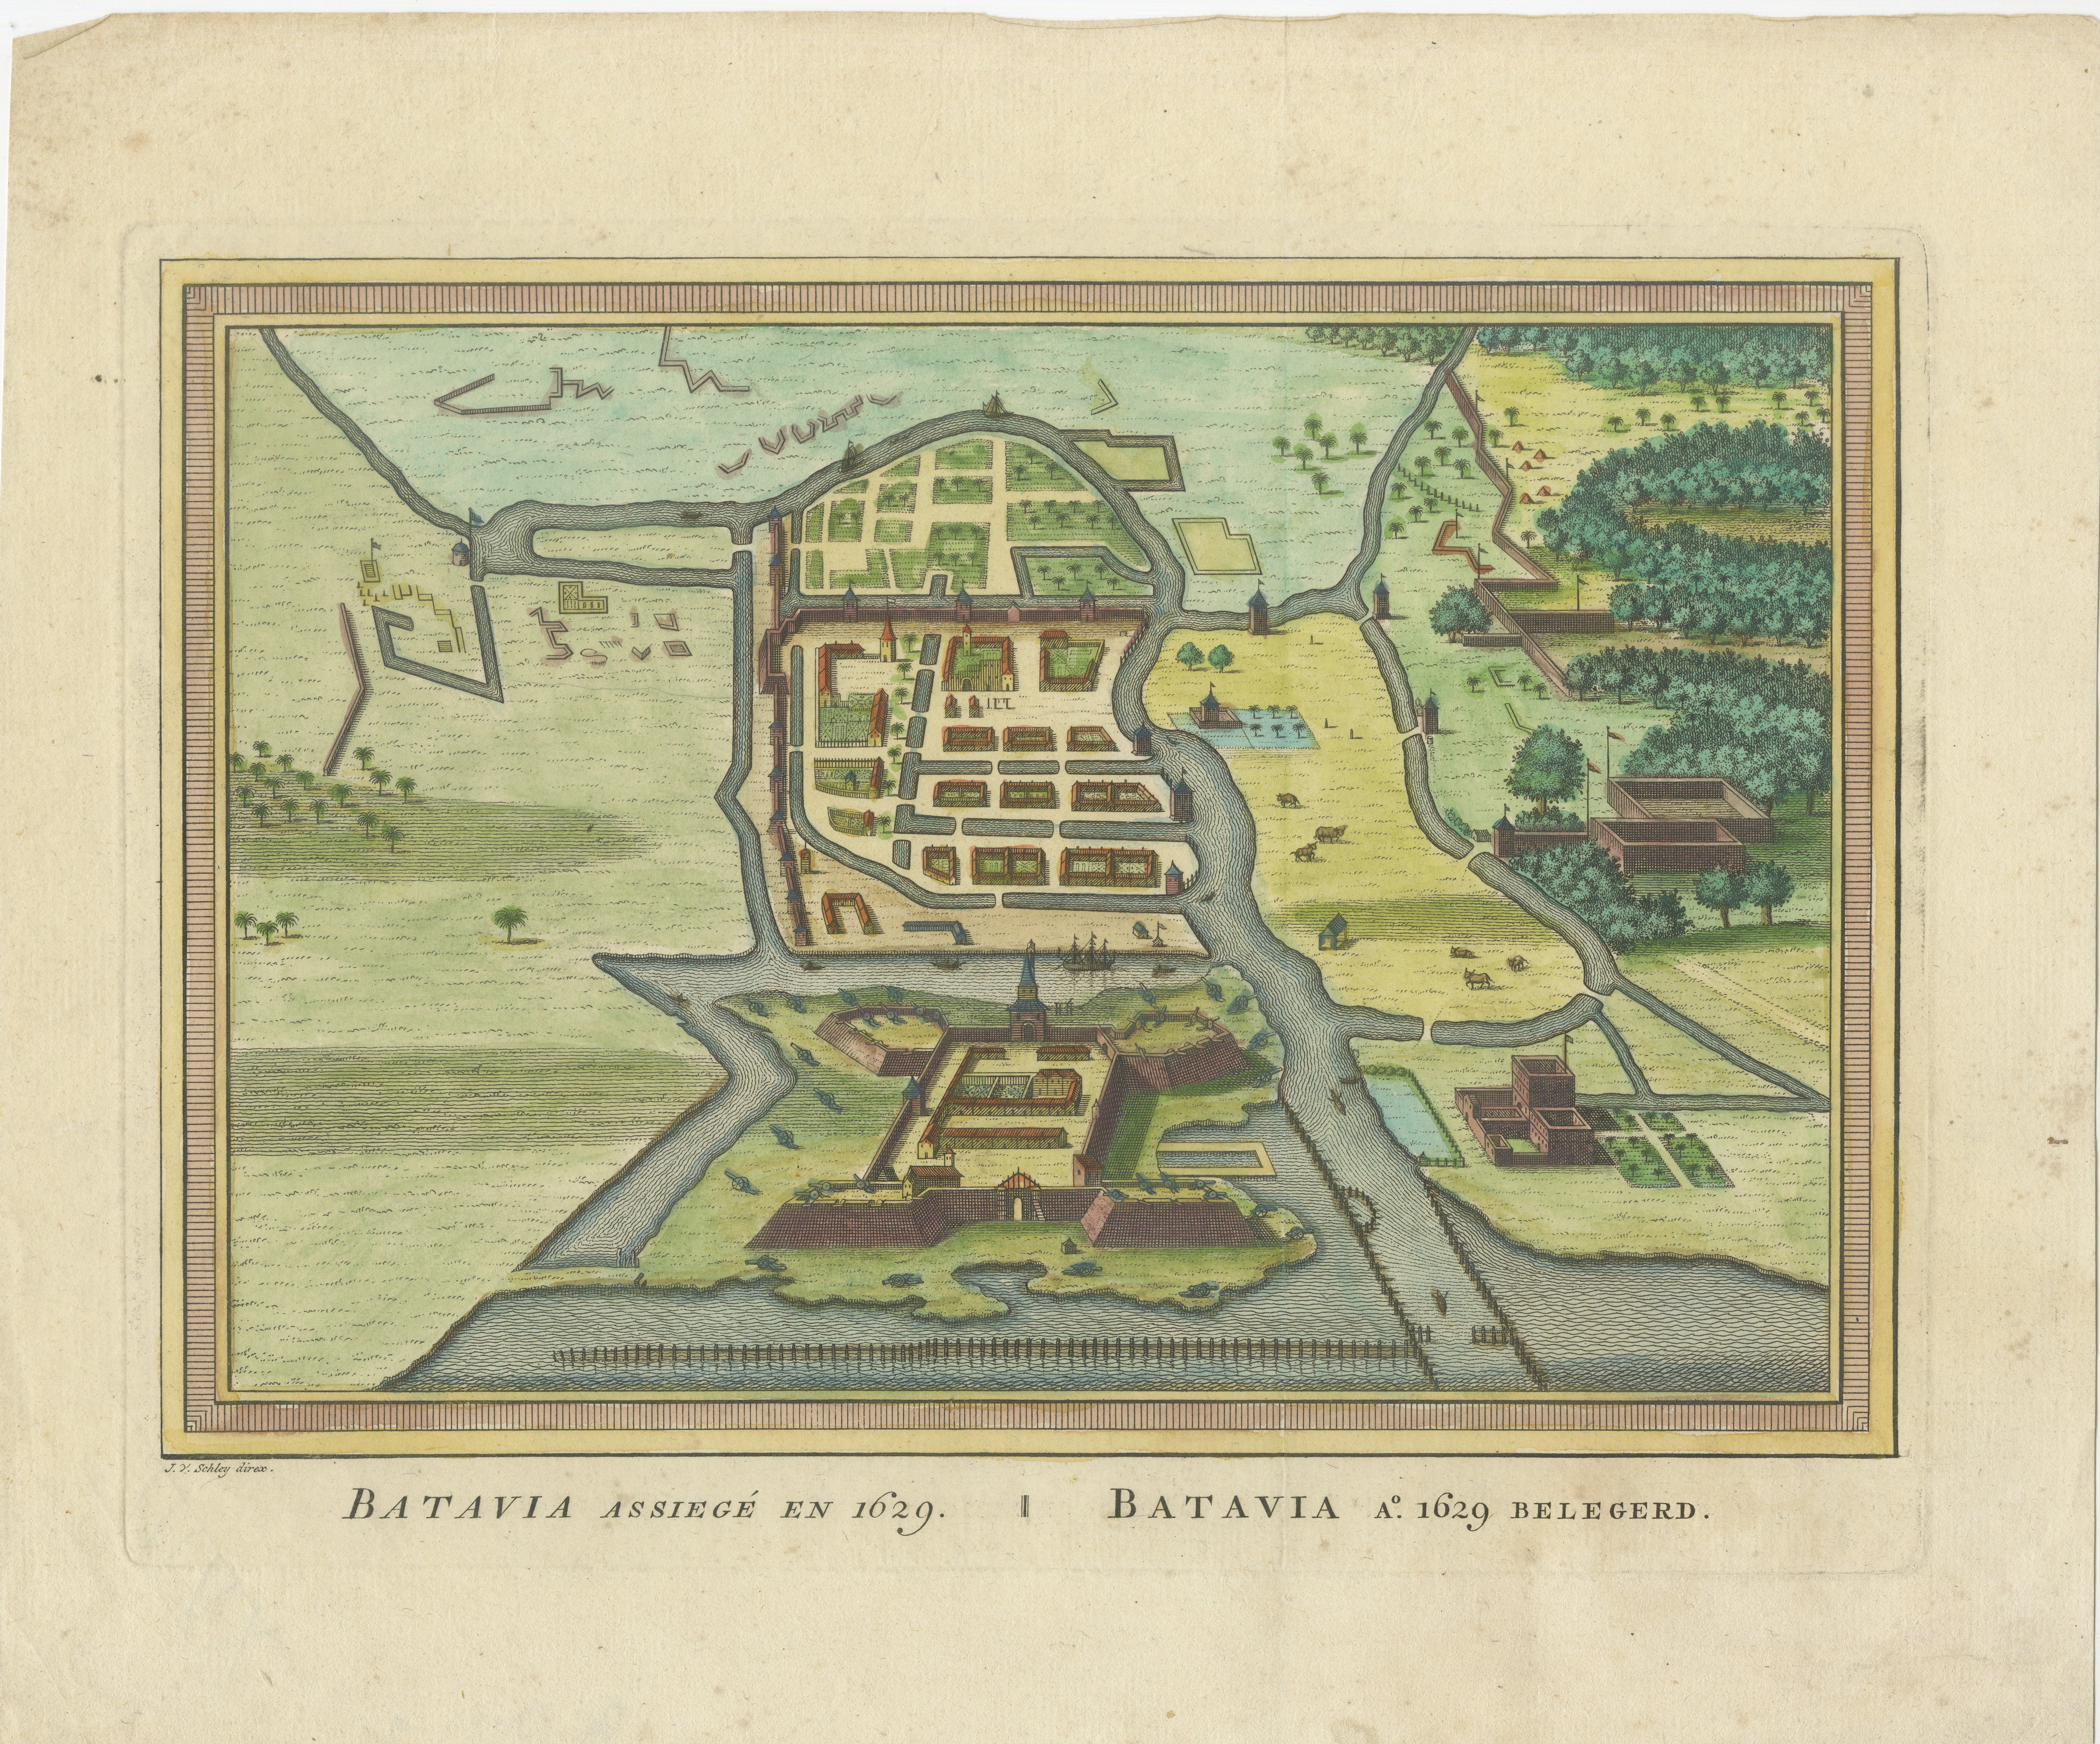 This is a bird's-eye view plan of Batavia, the historical name for Jakarta, Indonesia, dating back to 1763. 

The map was crafted by J van der Schley / P de Hondt and is a fine example of cartographic detail and artistry from the 18th century. It